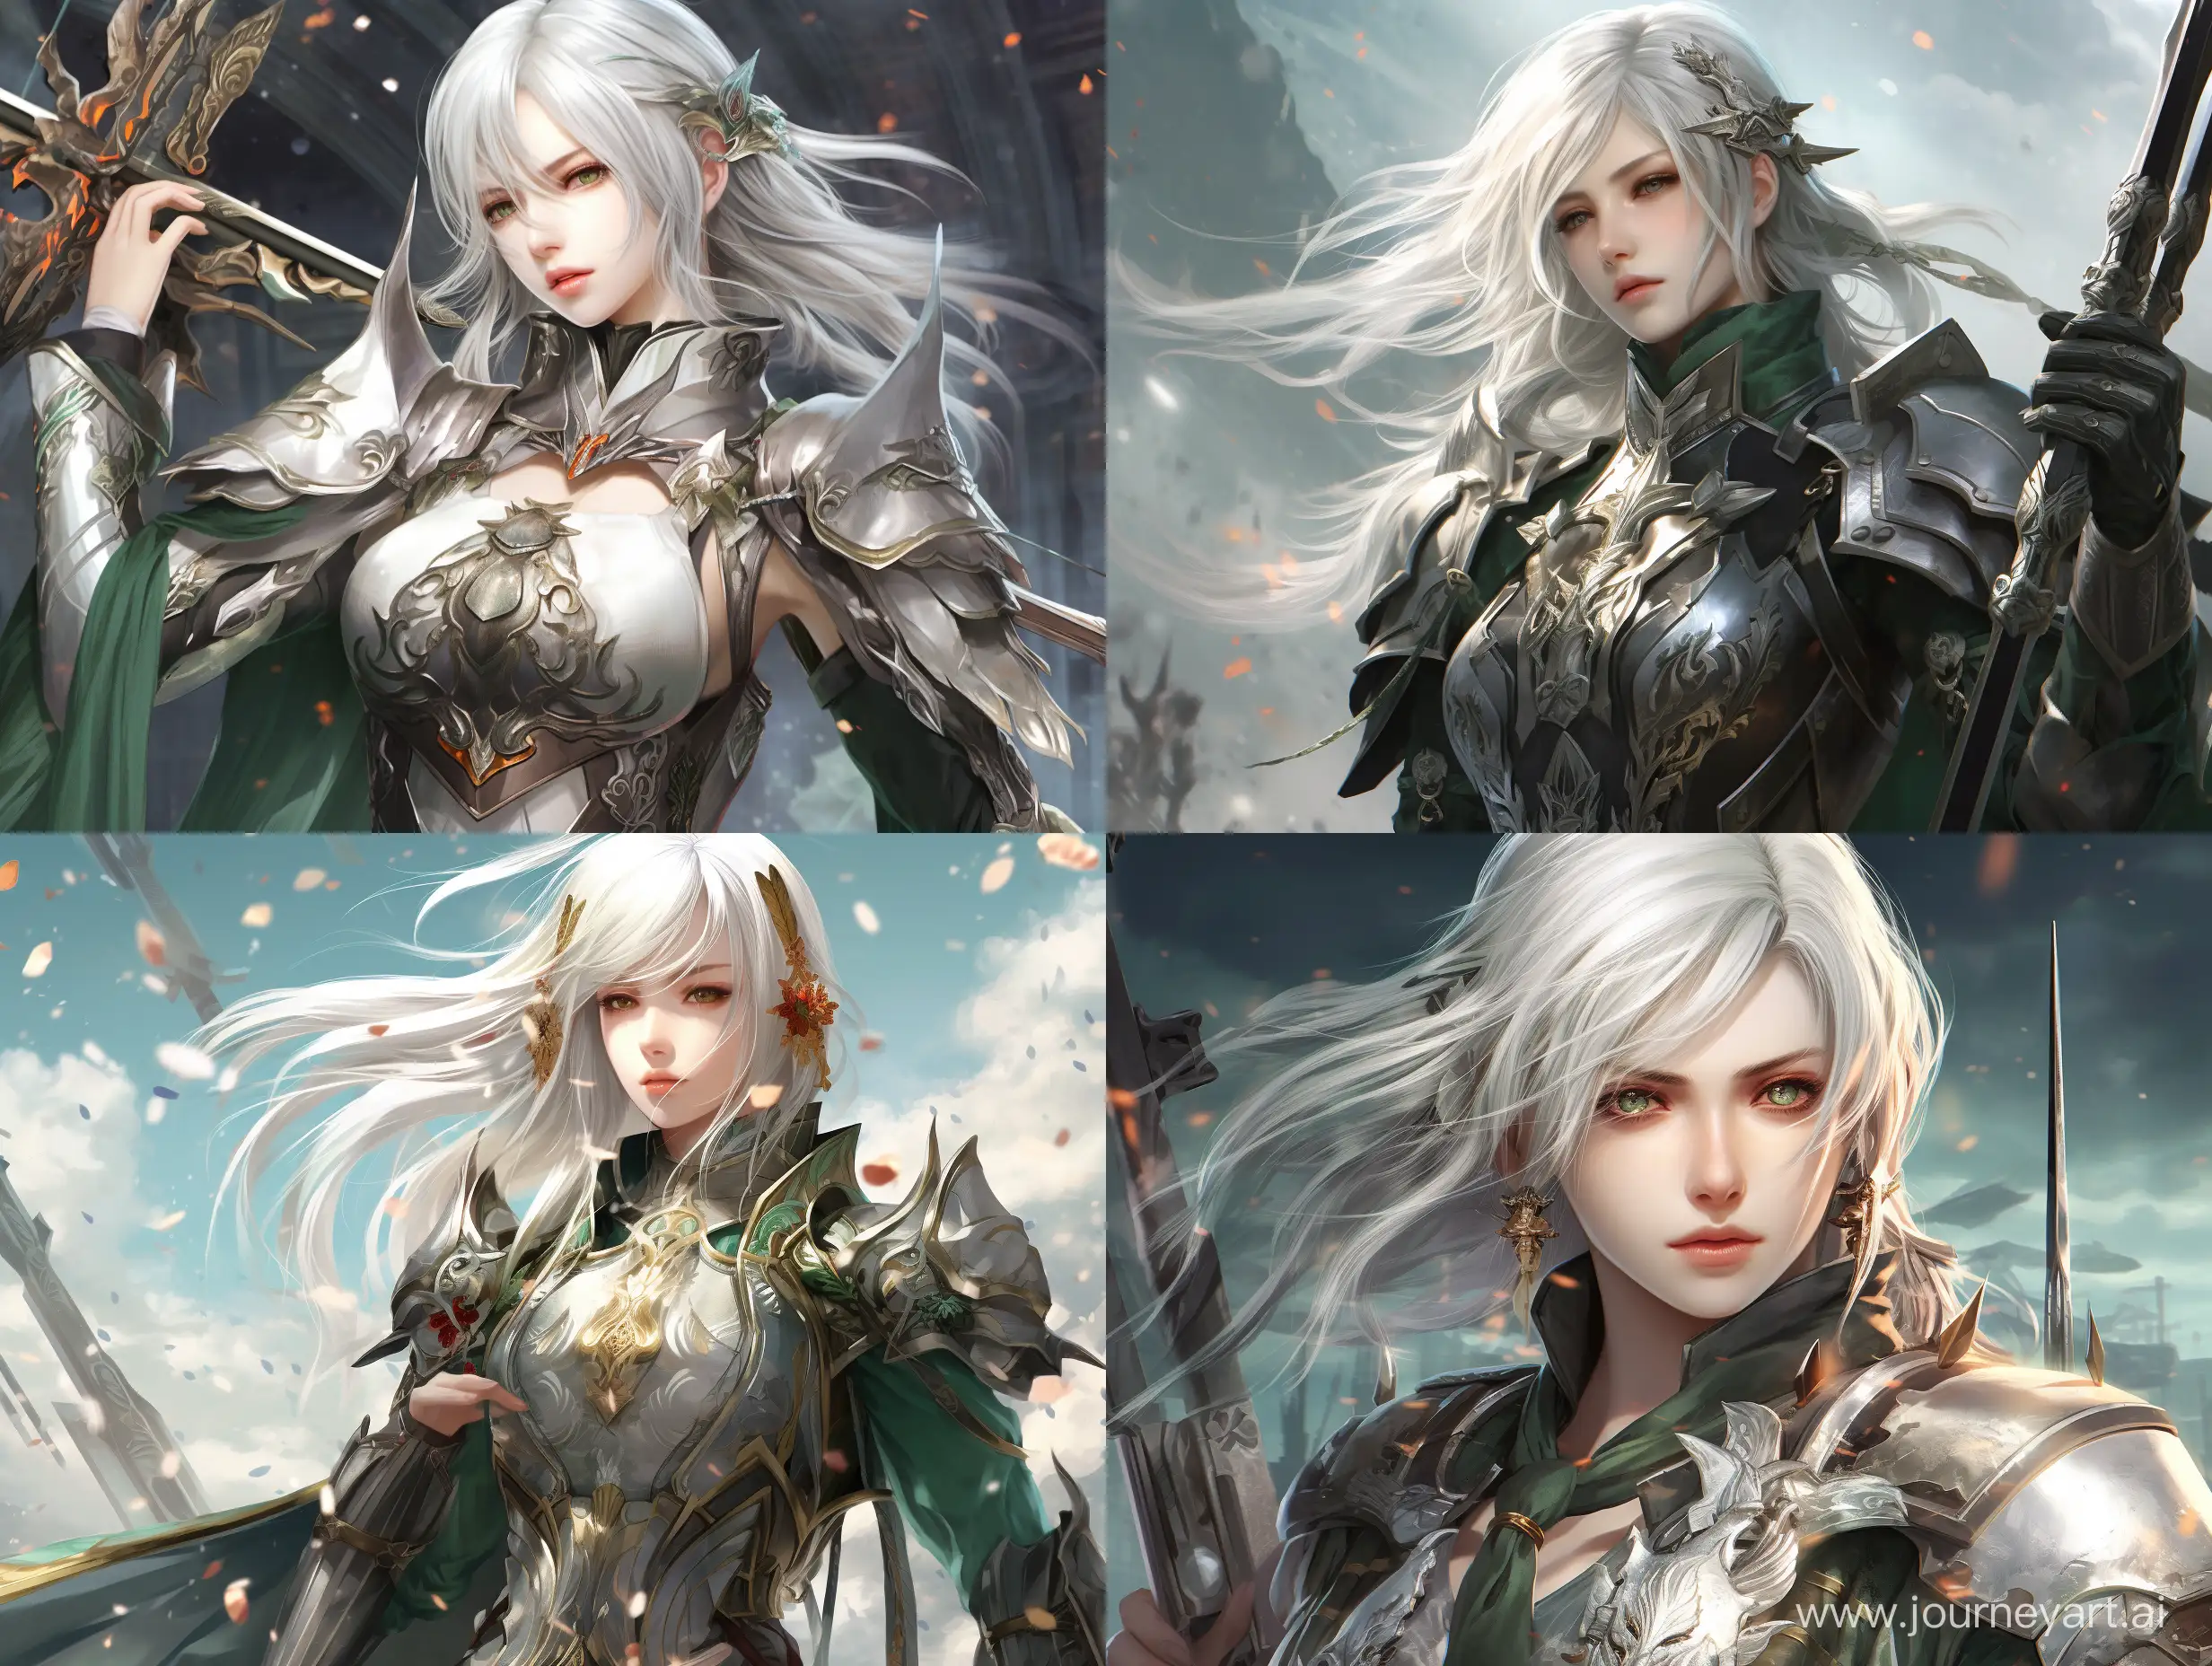 three kingdoms period female general, beautiful girl, white hair, silver head jewelry, spear in left hand, standing, green chinese armor with gold details, right hand raised with closed fist, chinese scenery, illustration, inspired by dynasty warriors.